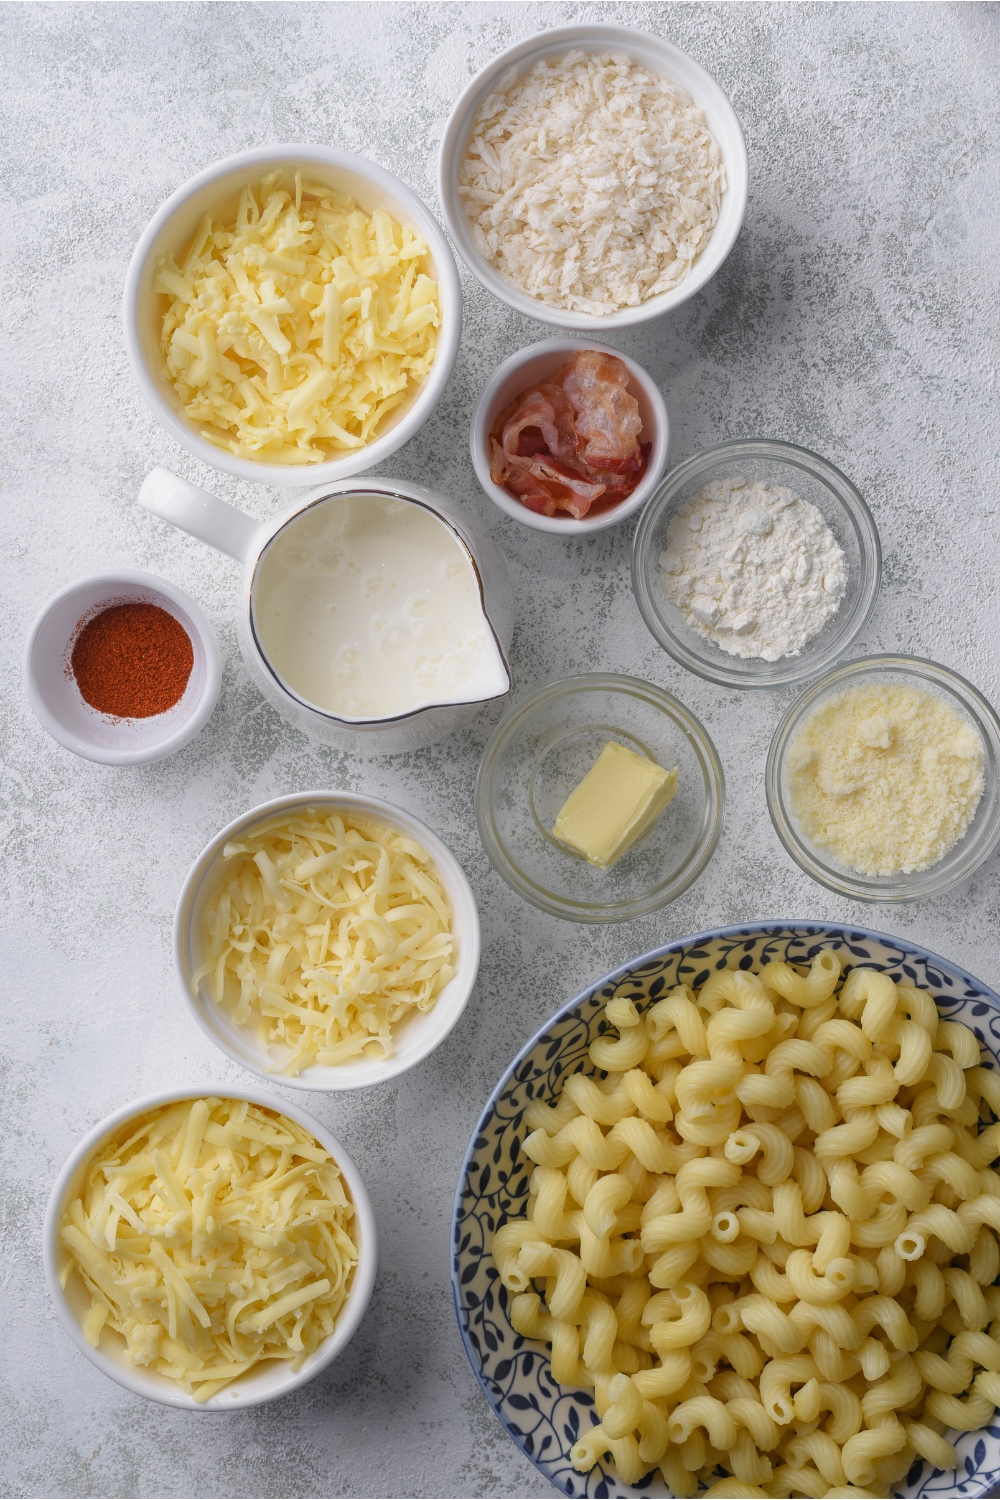 An assortment of ingredients including bowls of breadcrumbs, shredded cheese, bacon, butter, and pasta noodles.